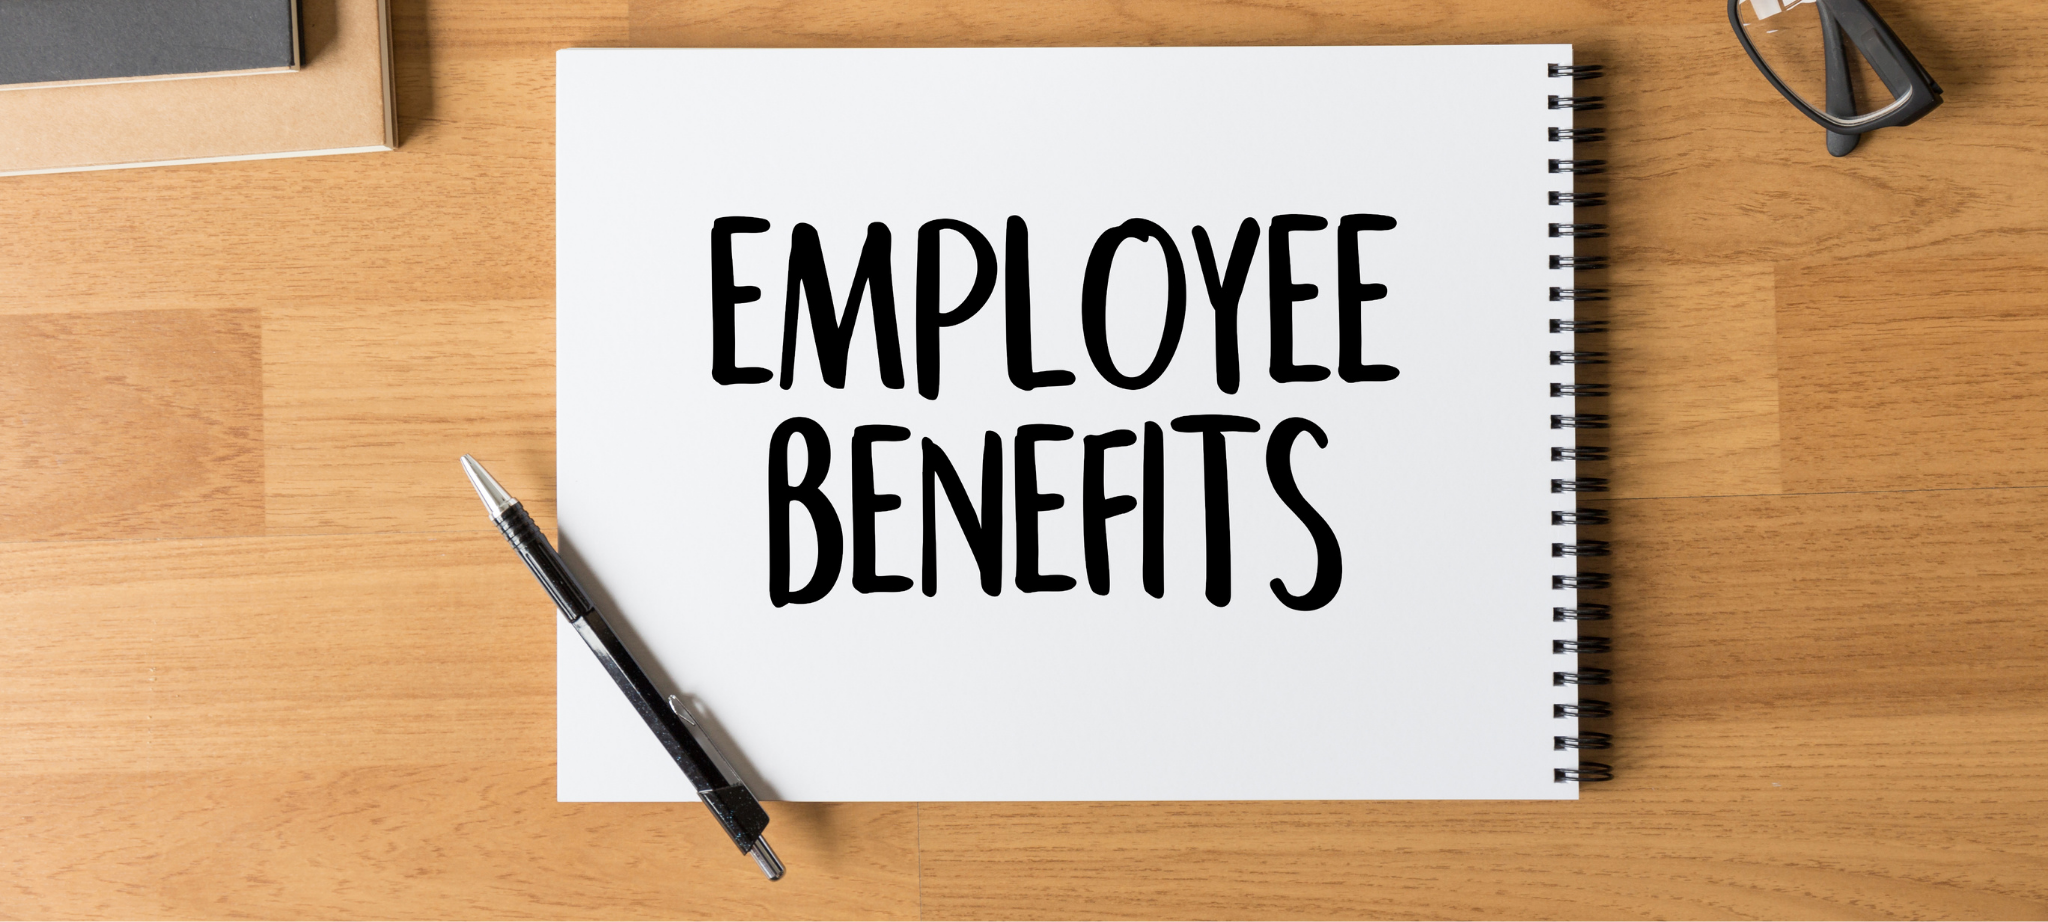 8 Tips for How to Educate Employees on Benefits 